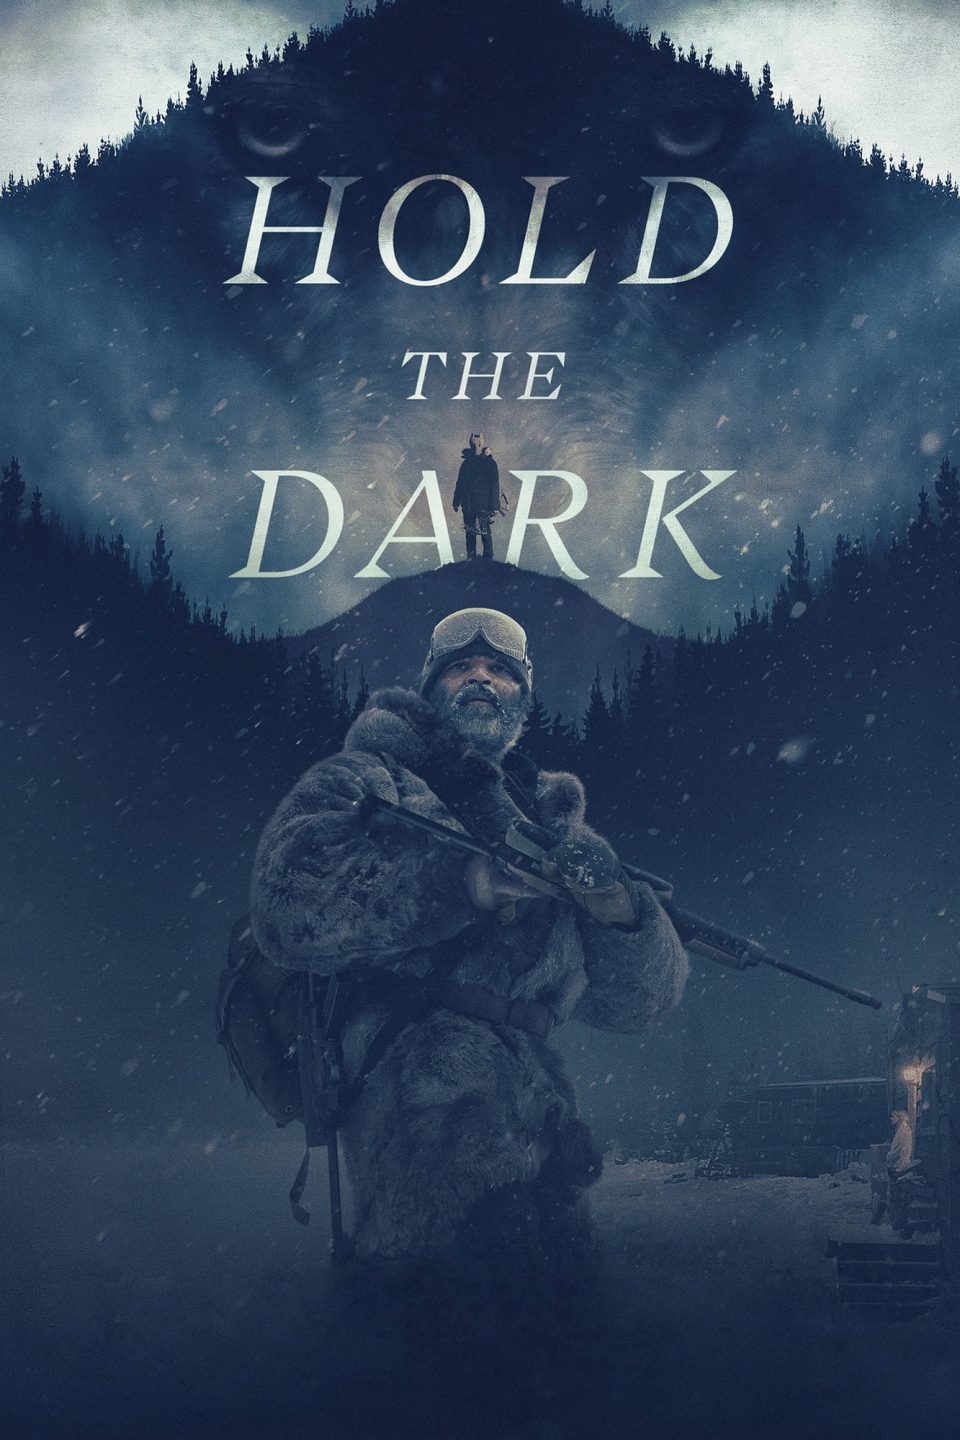 Poster for the movie "Hold the Dark"